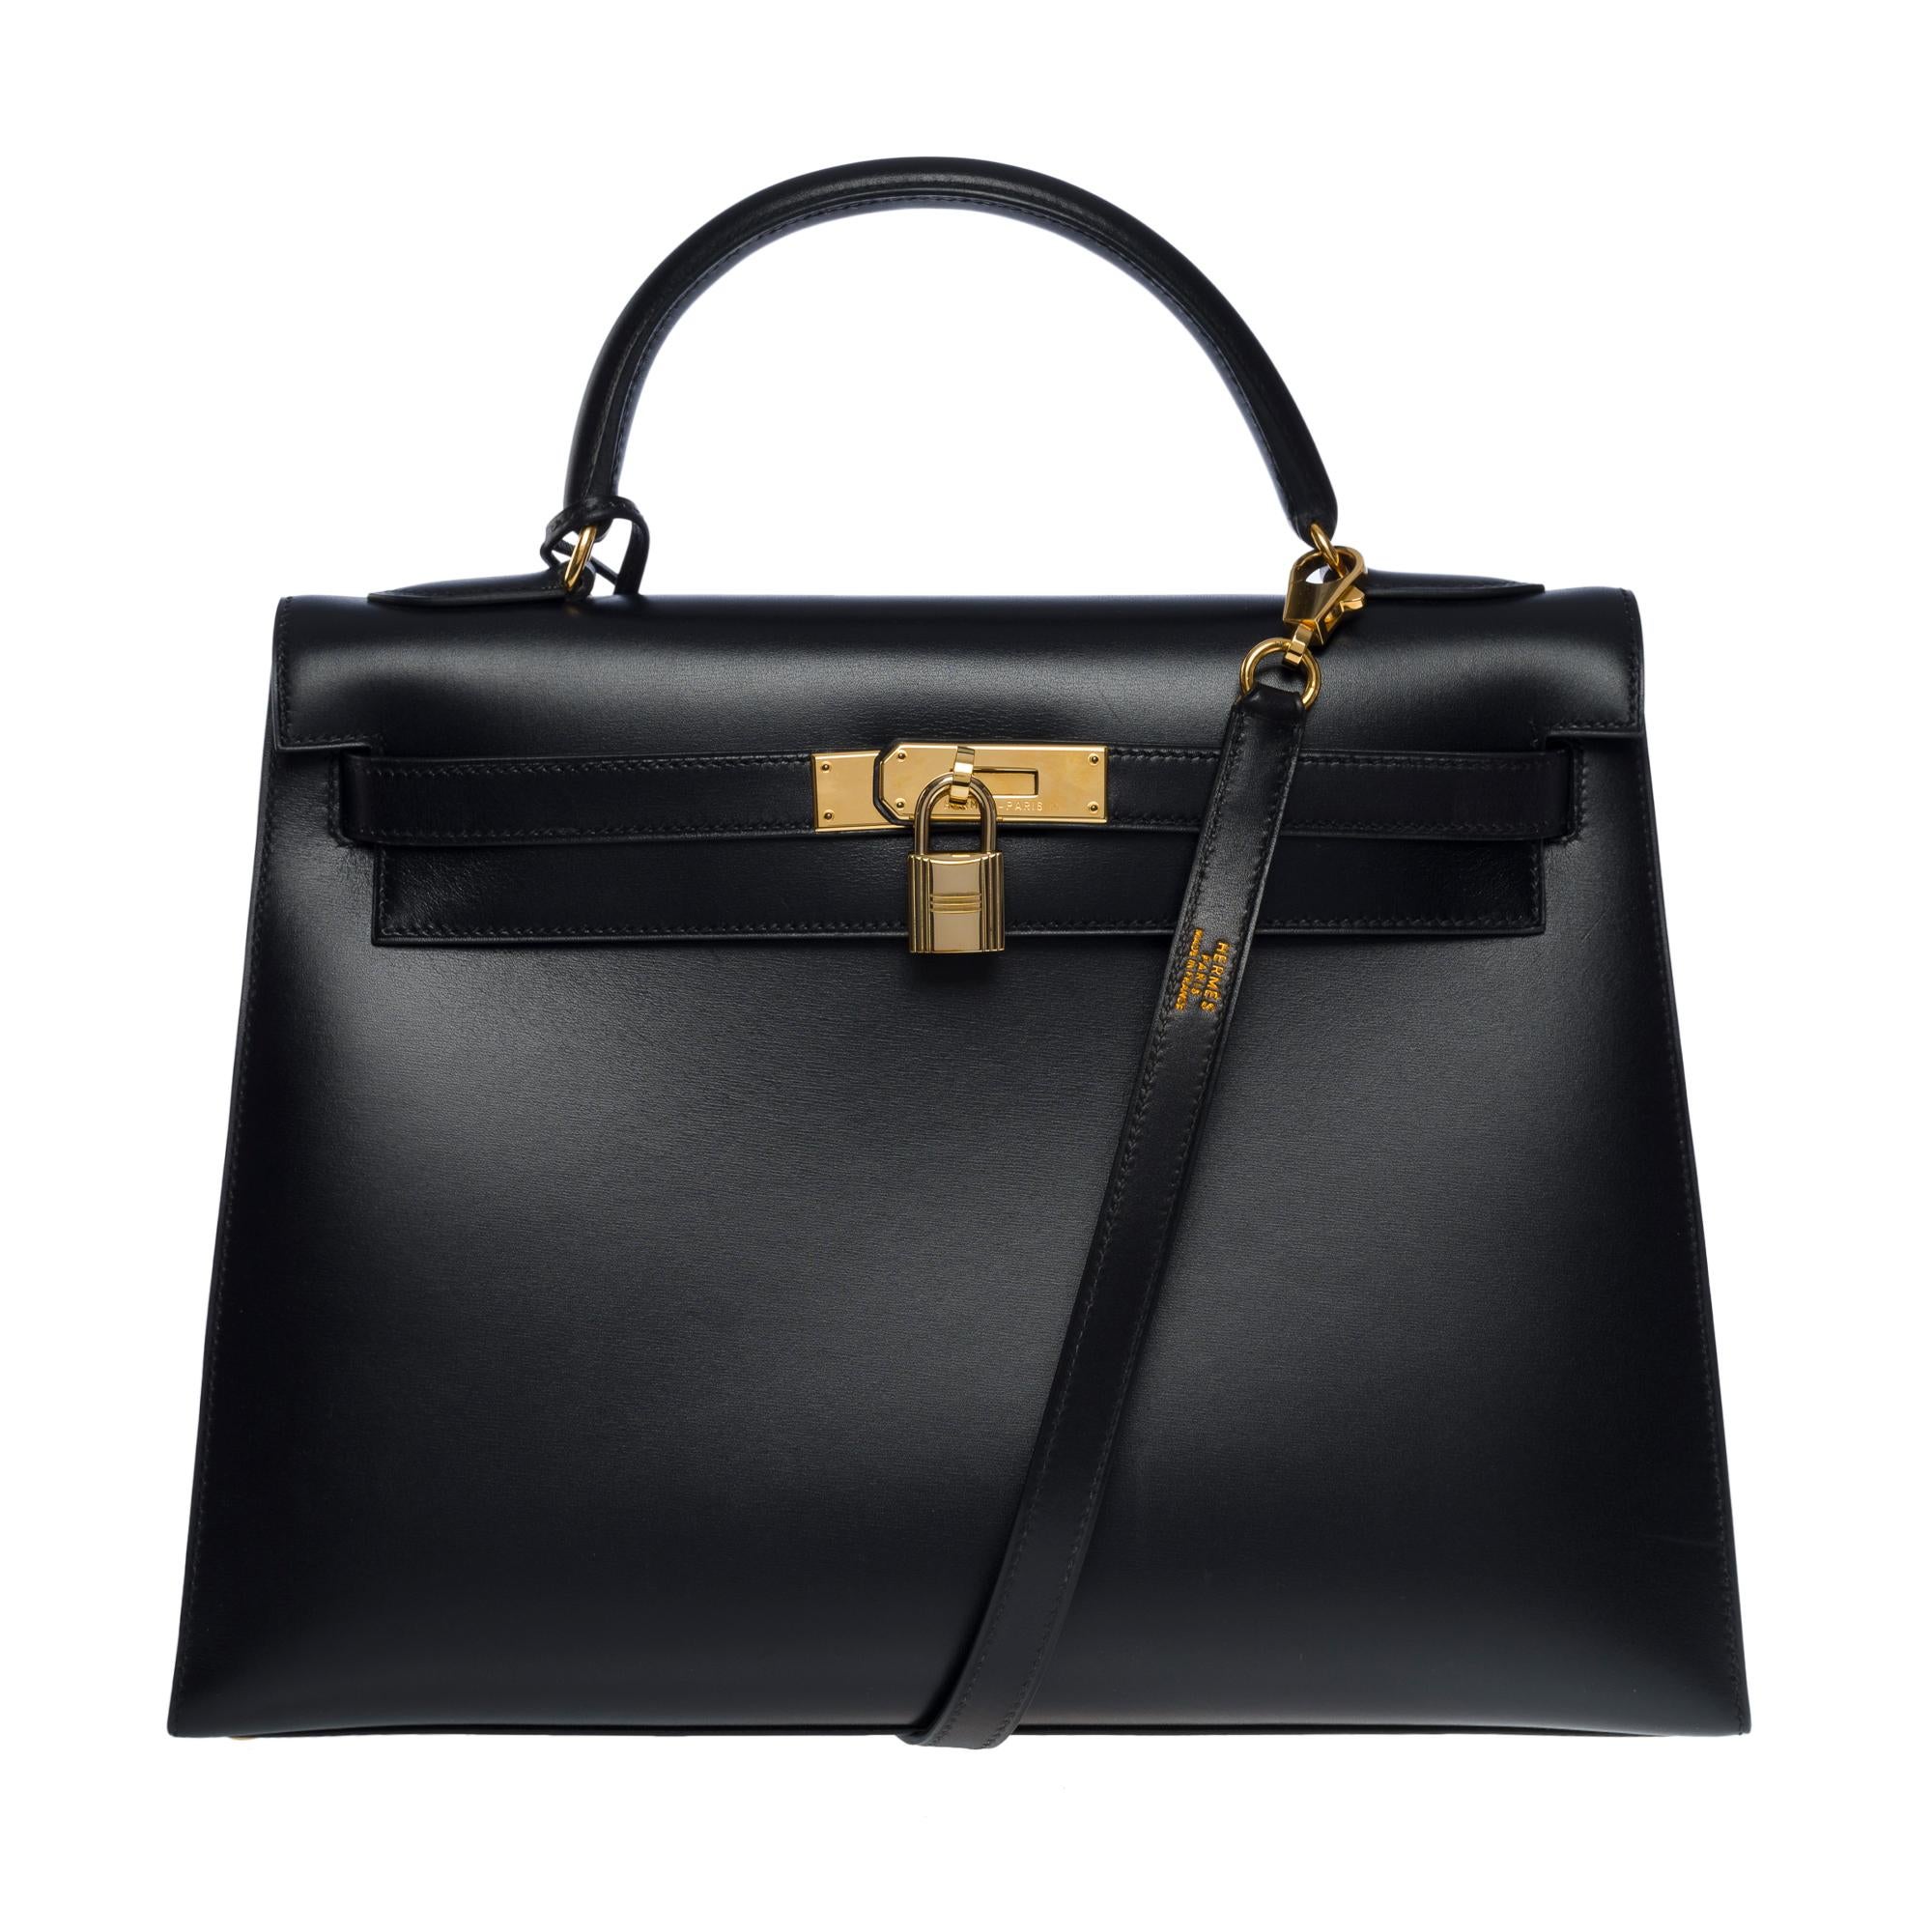 Stunning Hermes Kelly 32 sellier handbag strap in black box calf leather, gold plated metal hardware, simple black box leather handle , a removable black box leather shoulder strap for a hand, shoulder or shoulder carry

Flap closure
Black leather